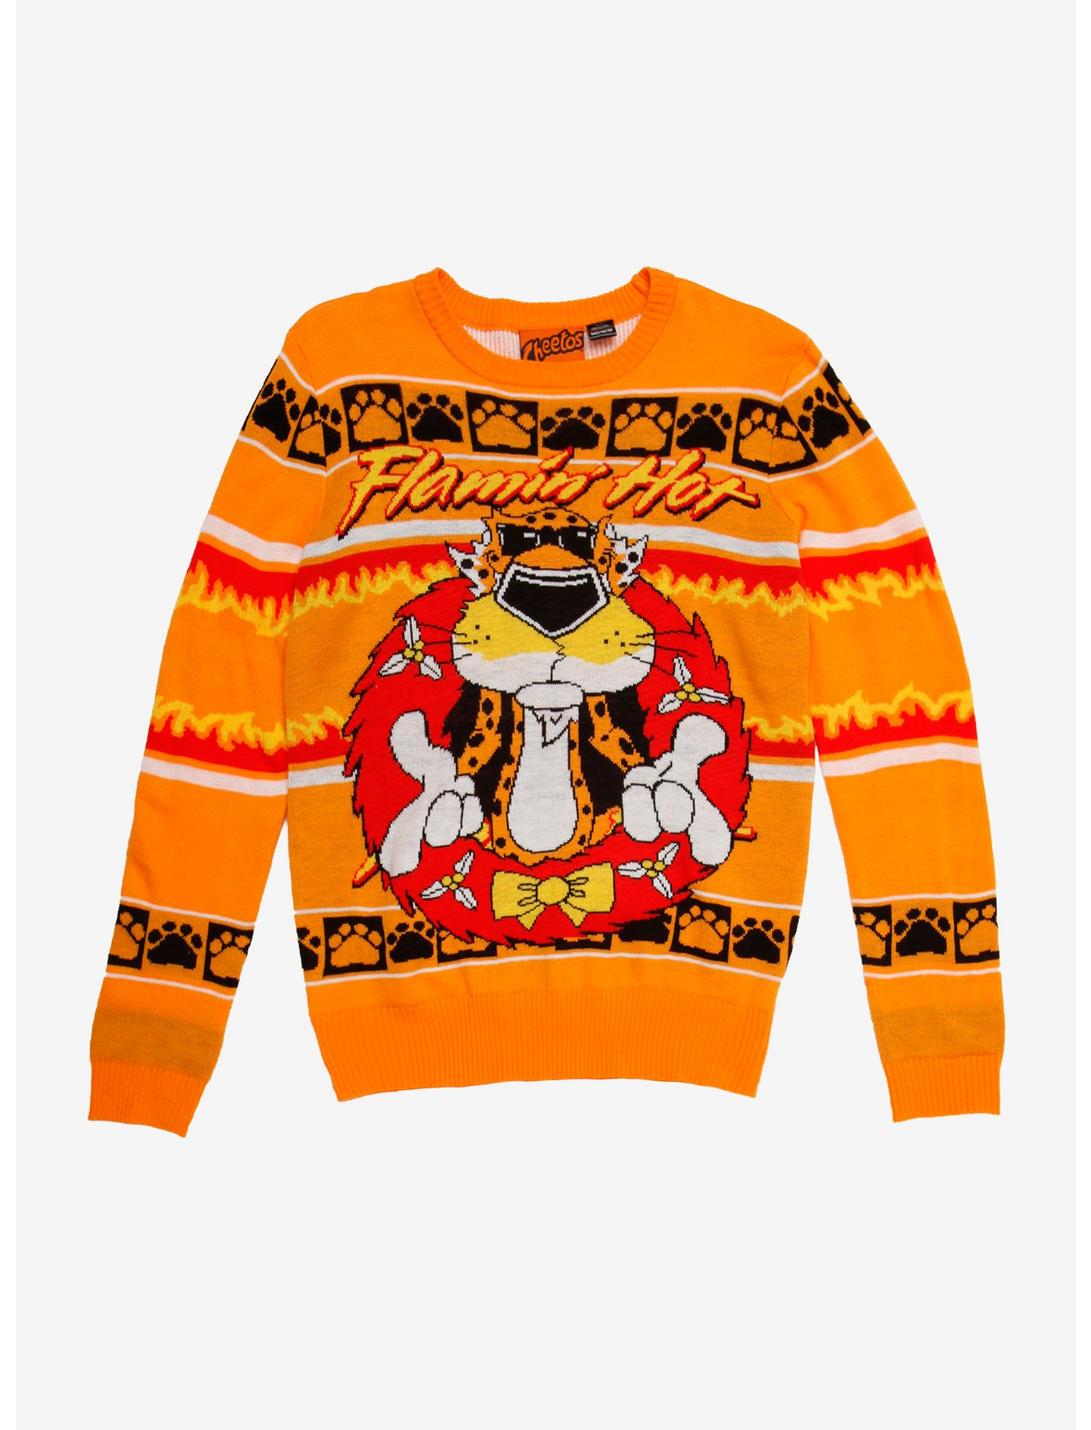 Plus Size Cheetos Flamin' Hot Chester Cheetah Holiday Sweater, MULTI, hi-res